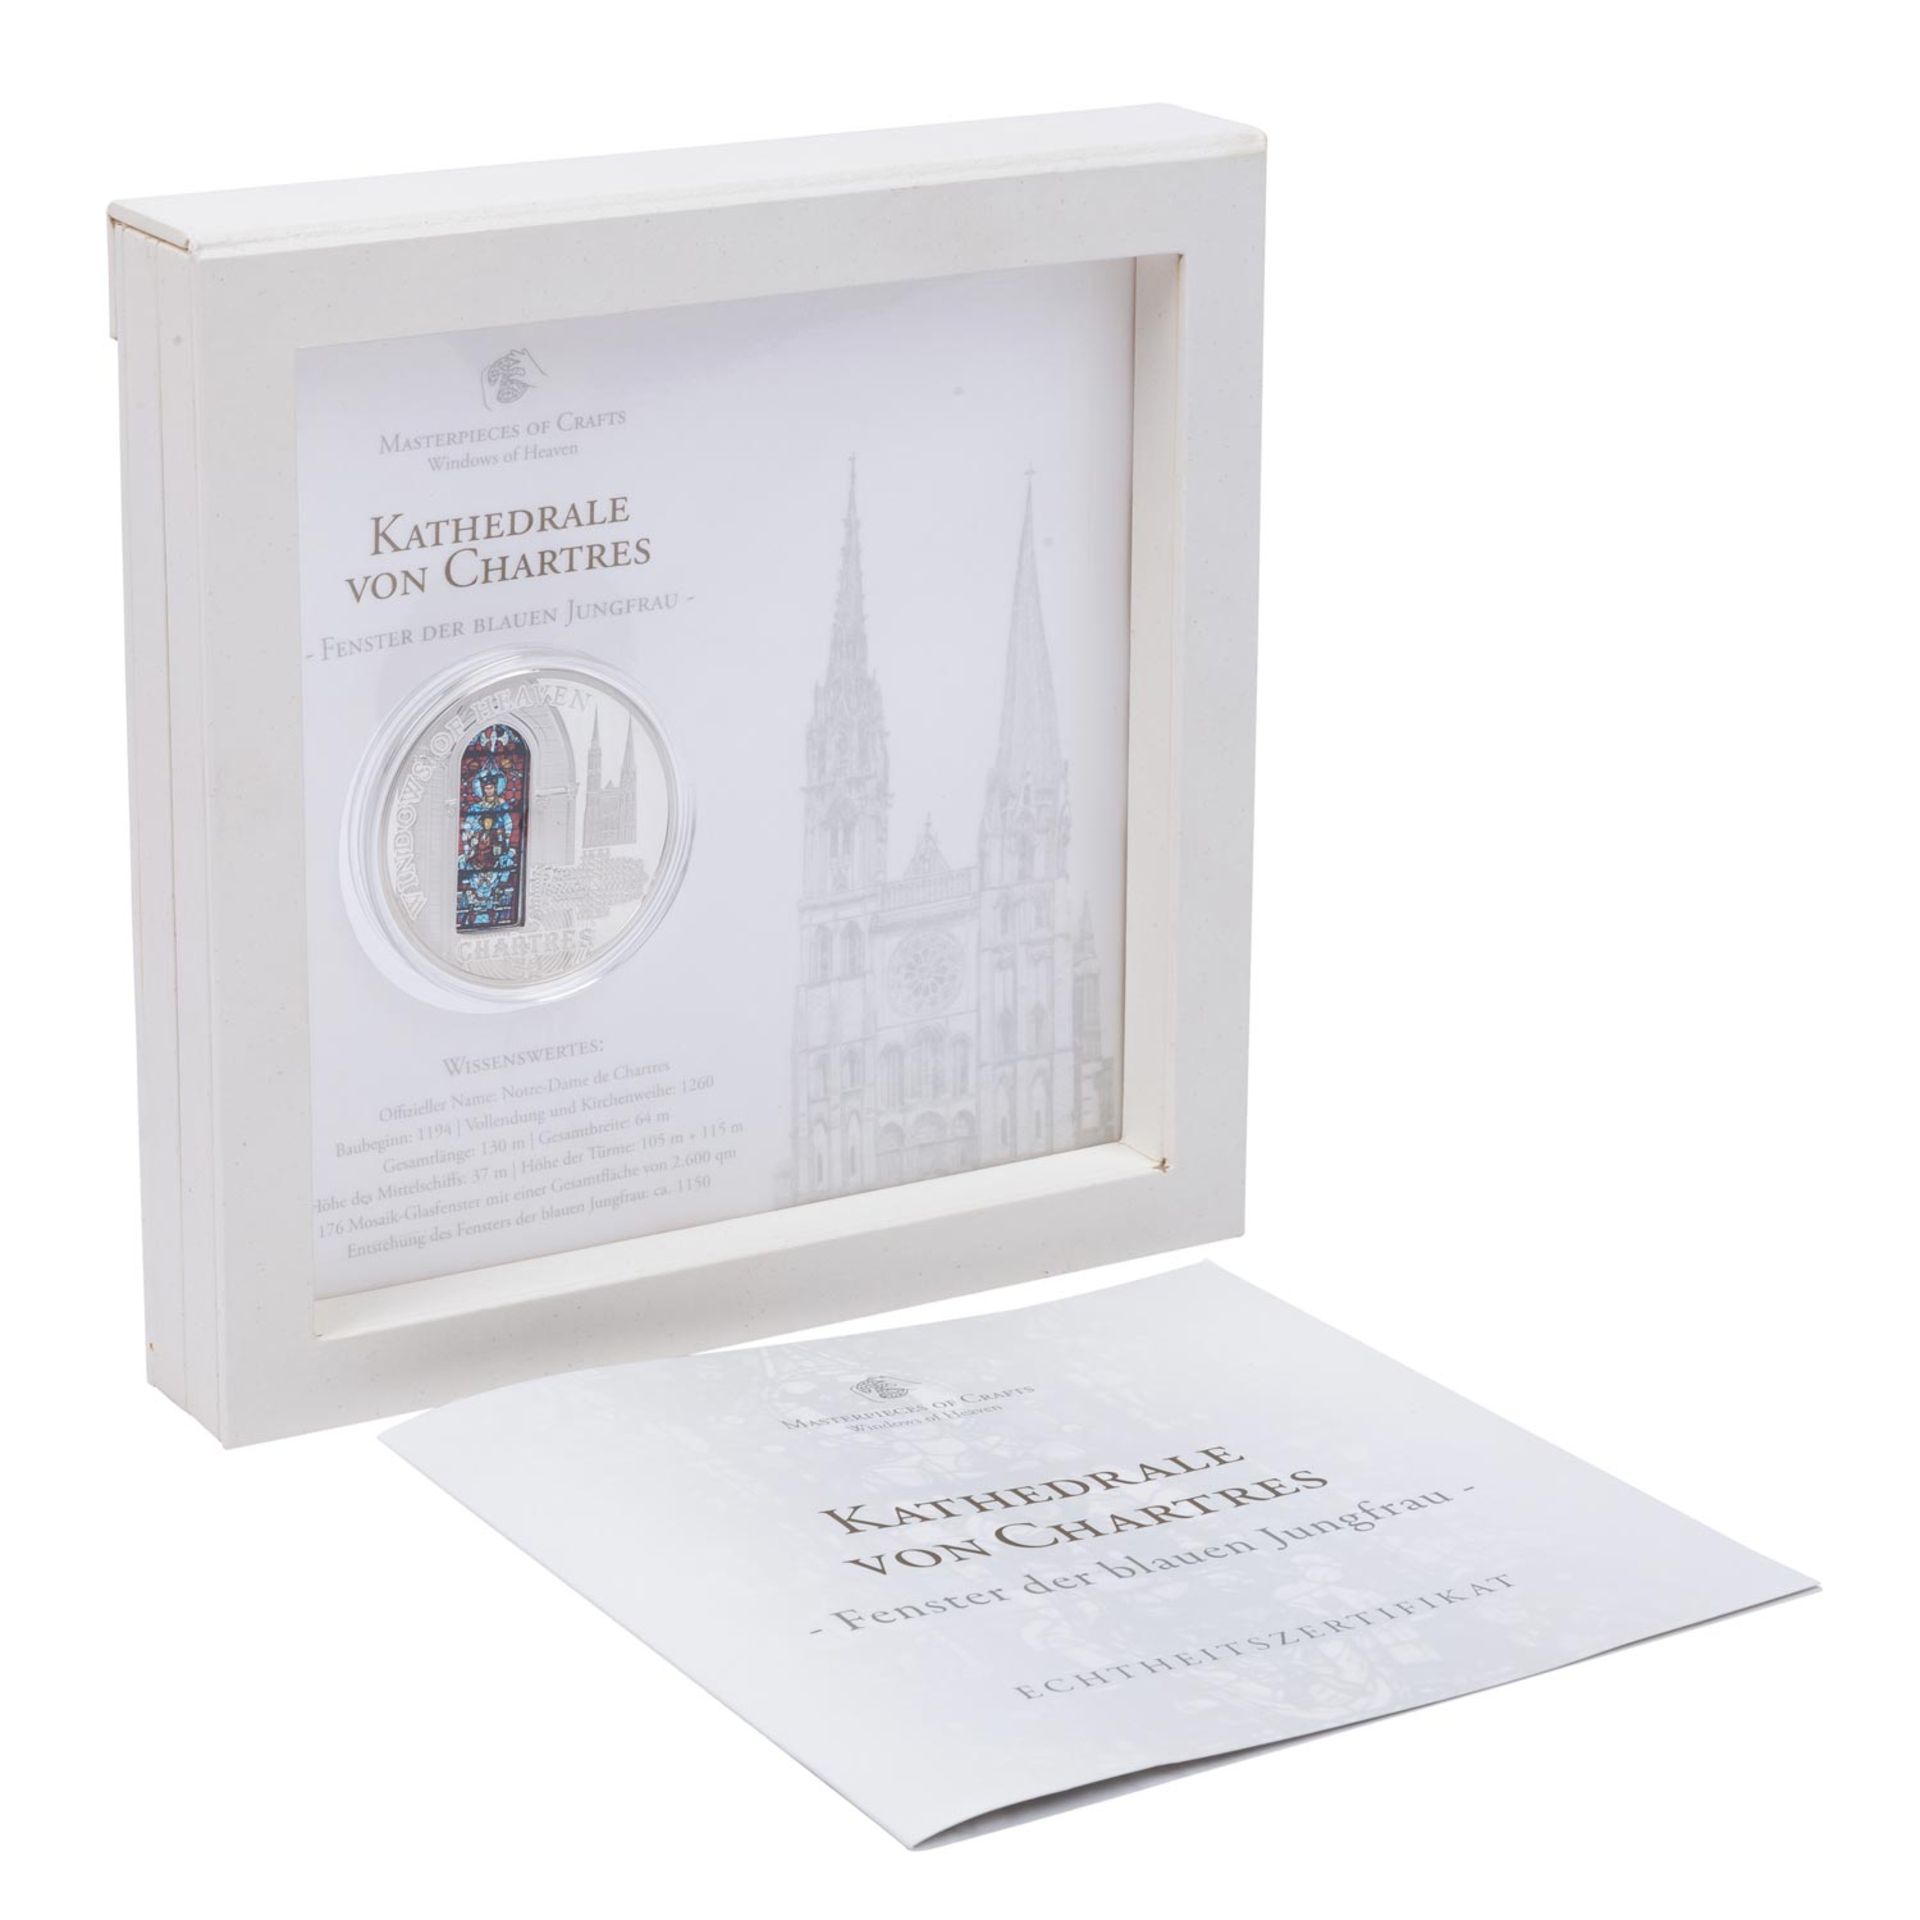 MASTERPIECES OF CRAFTS - Kathedrale von Chartres, 925 Silber, 2013,